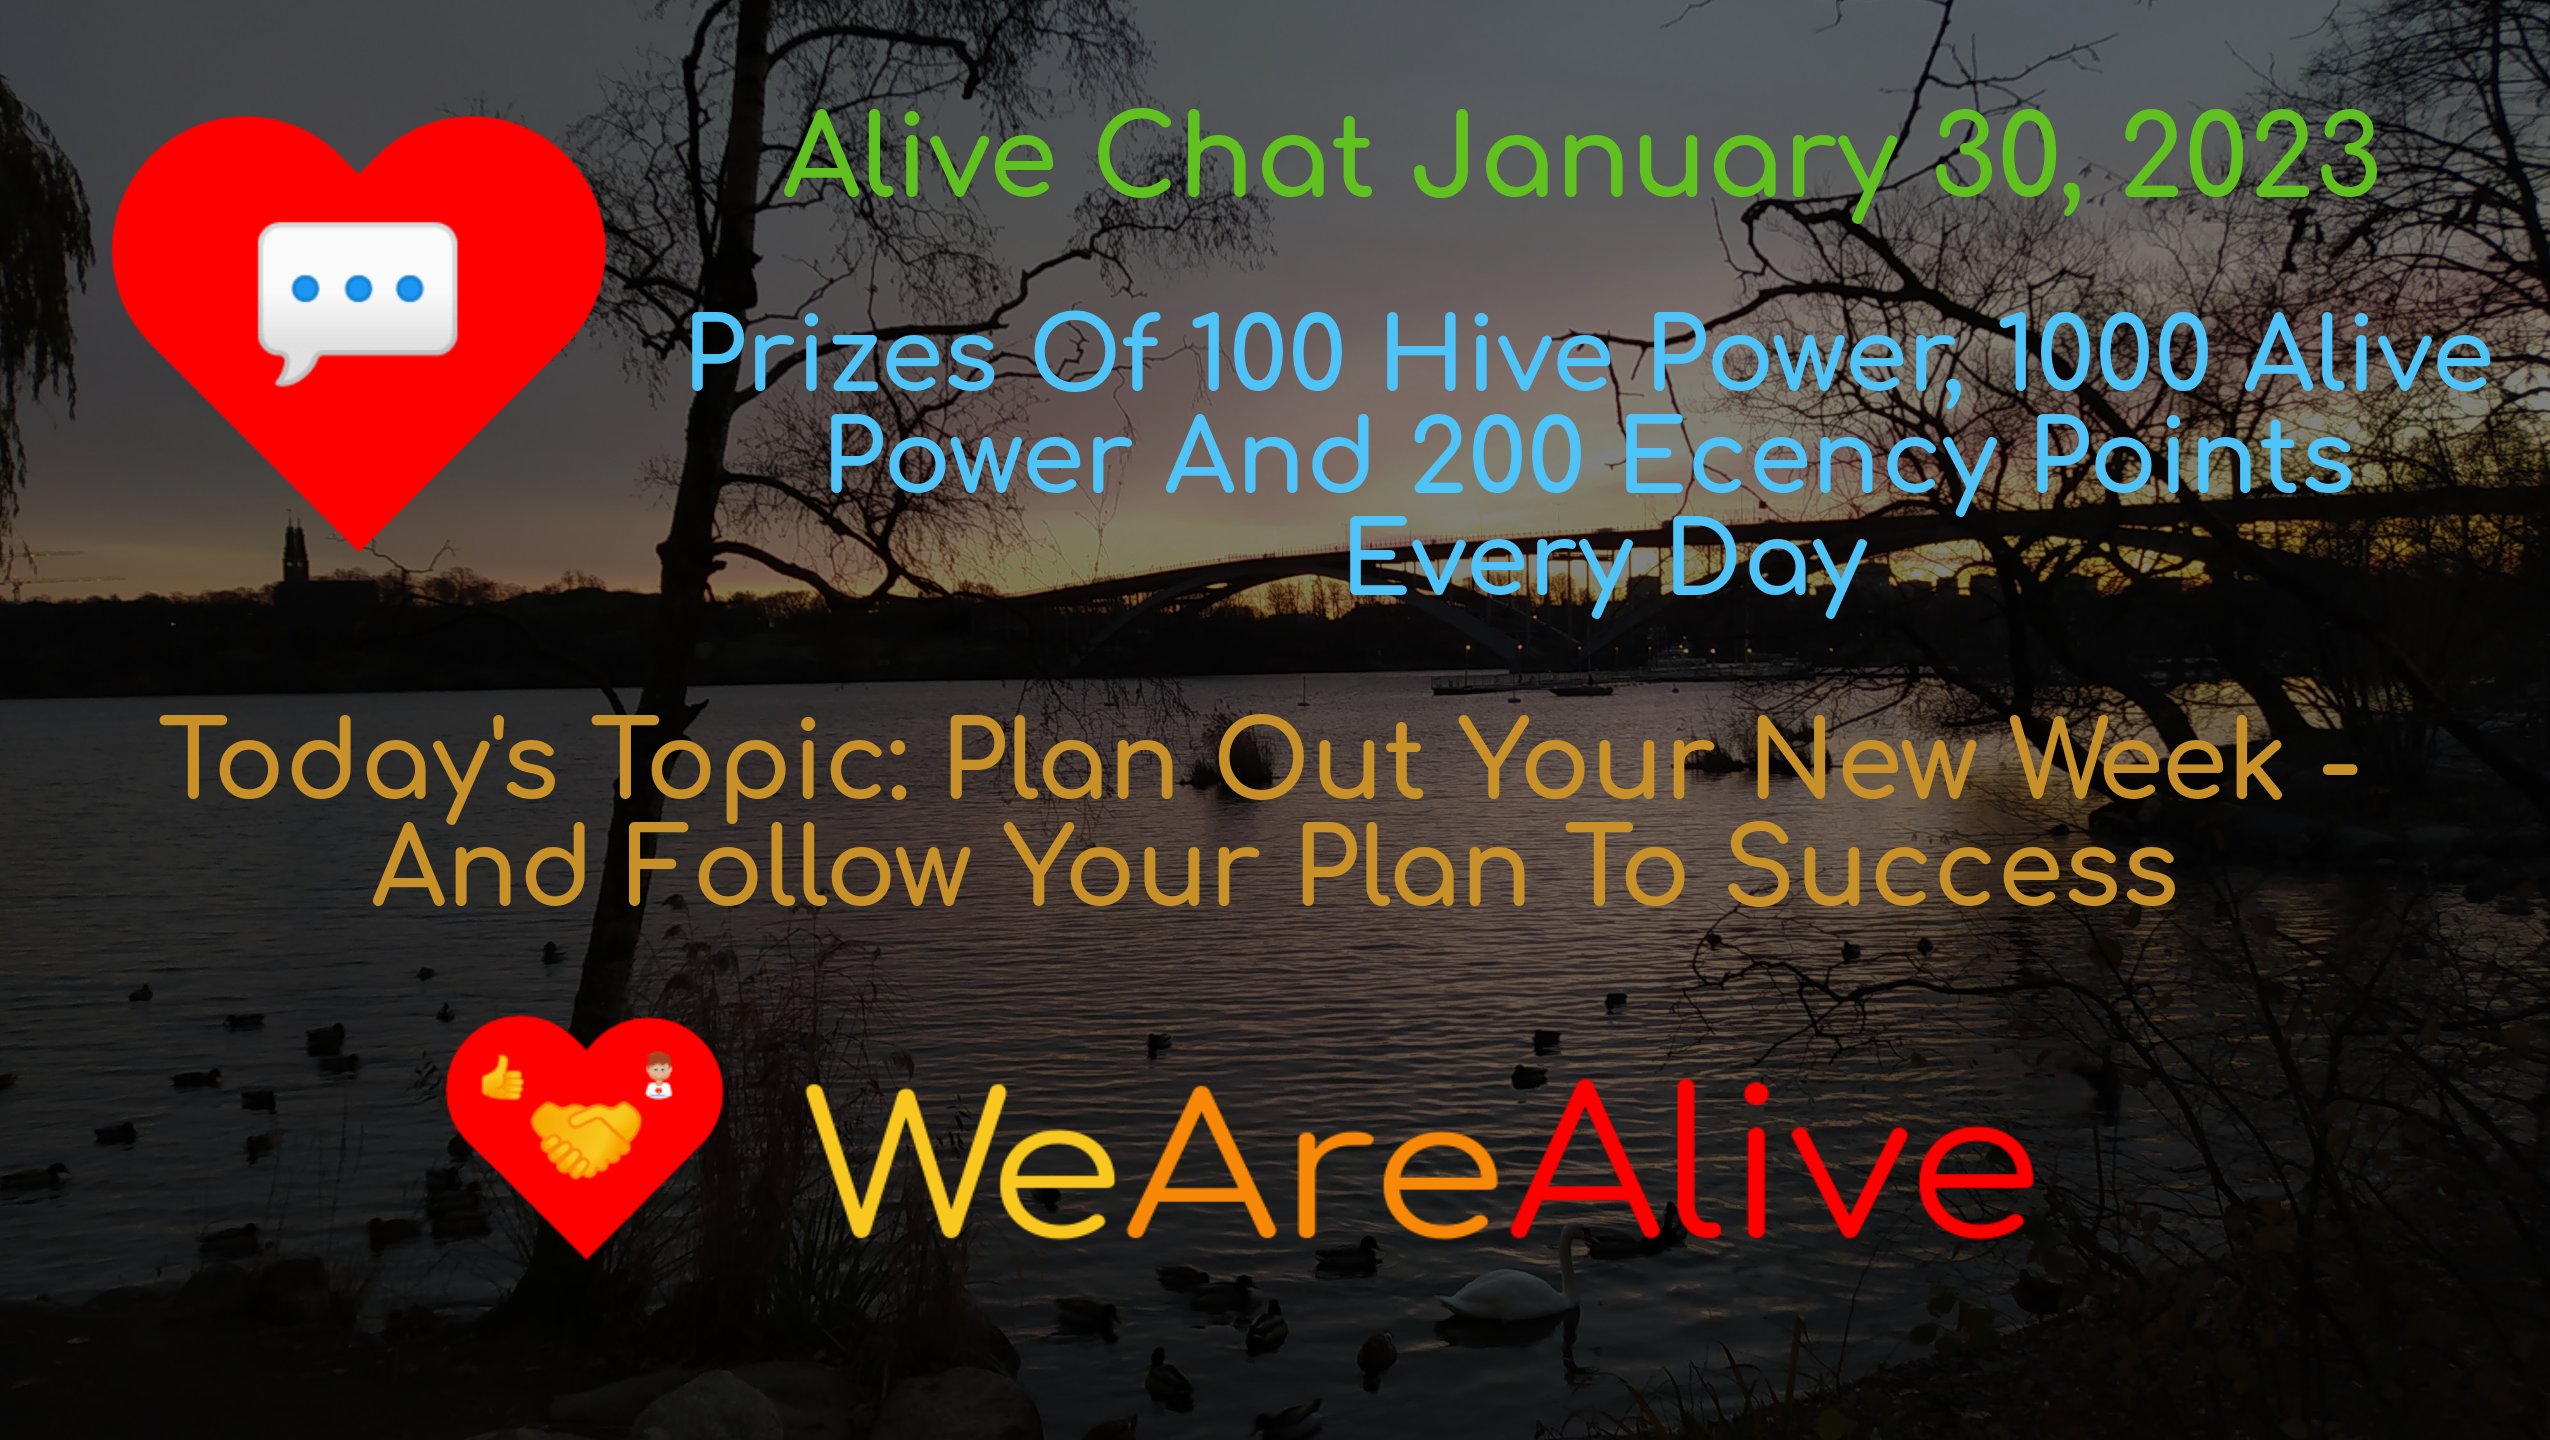 @alive.chat/alive-chat-january-30-2023